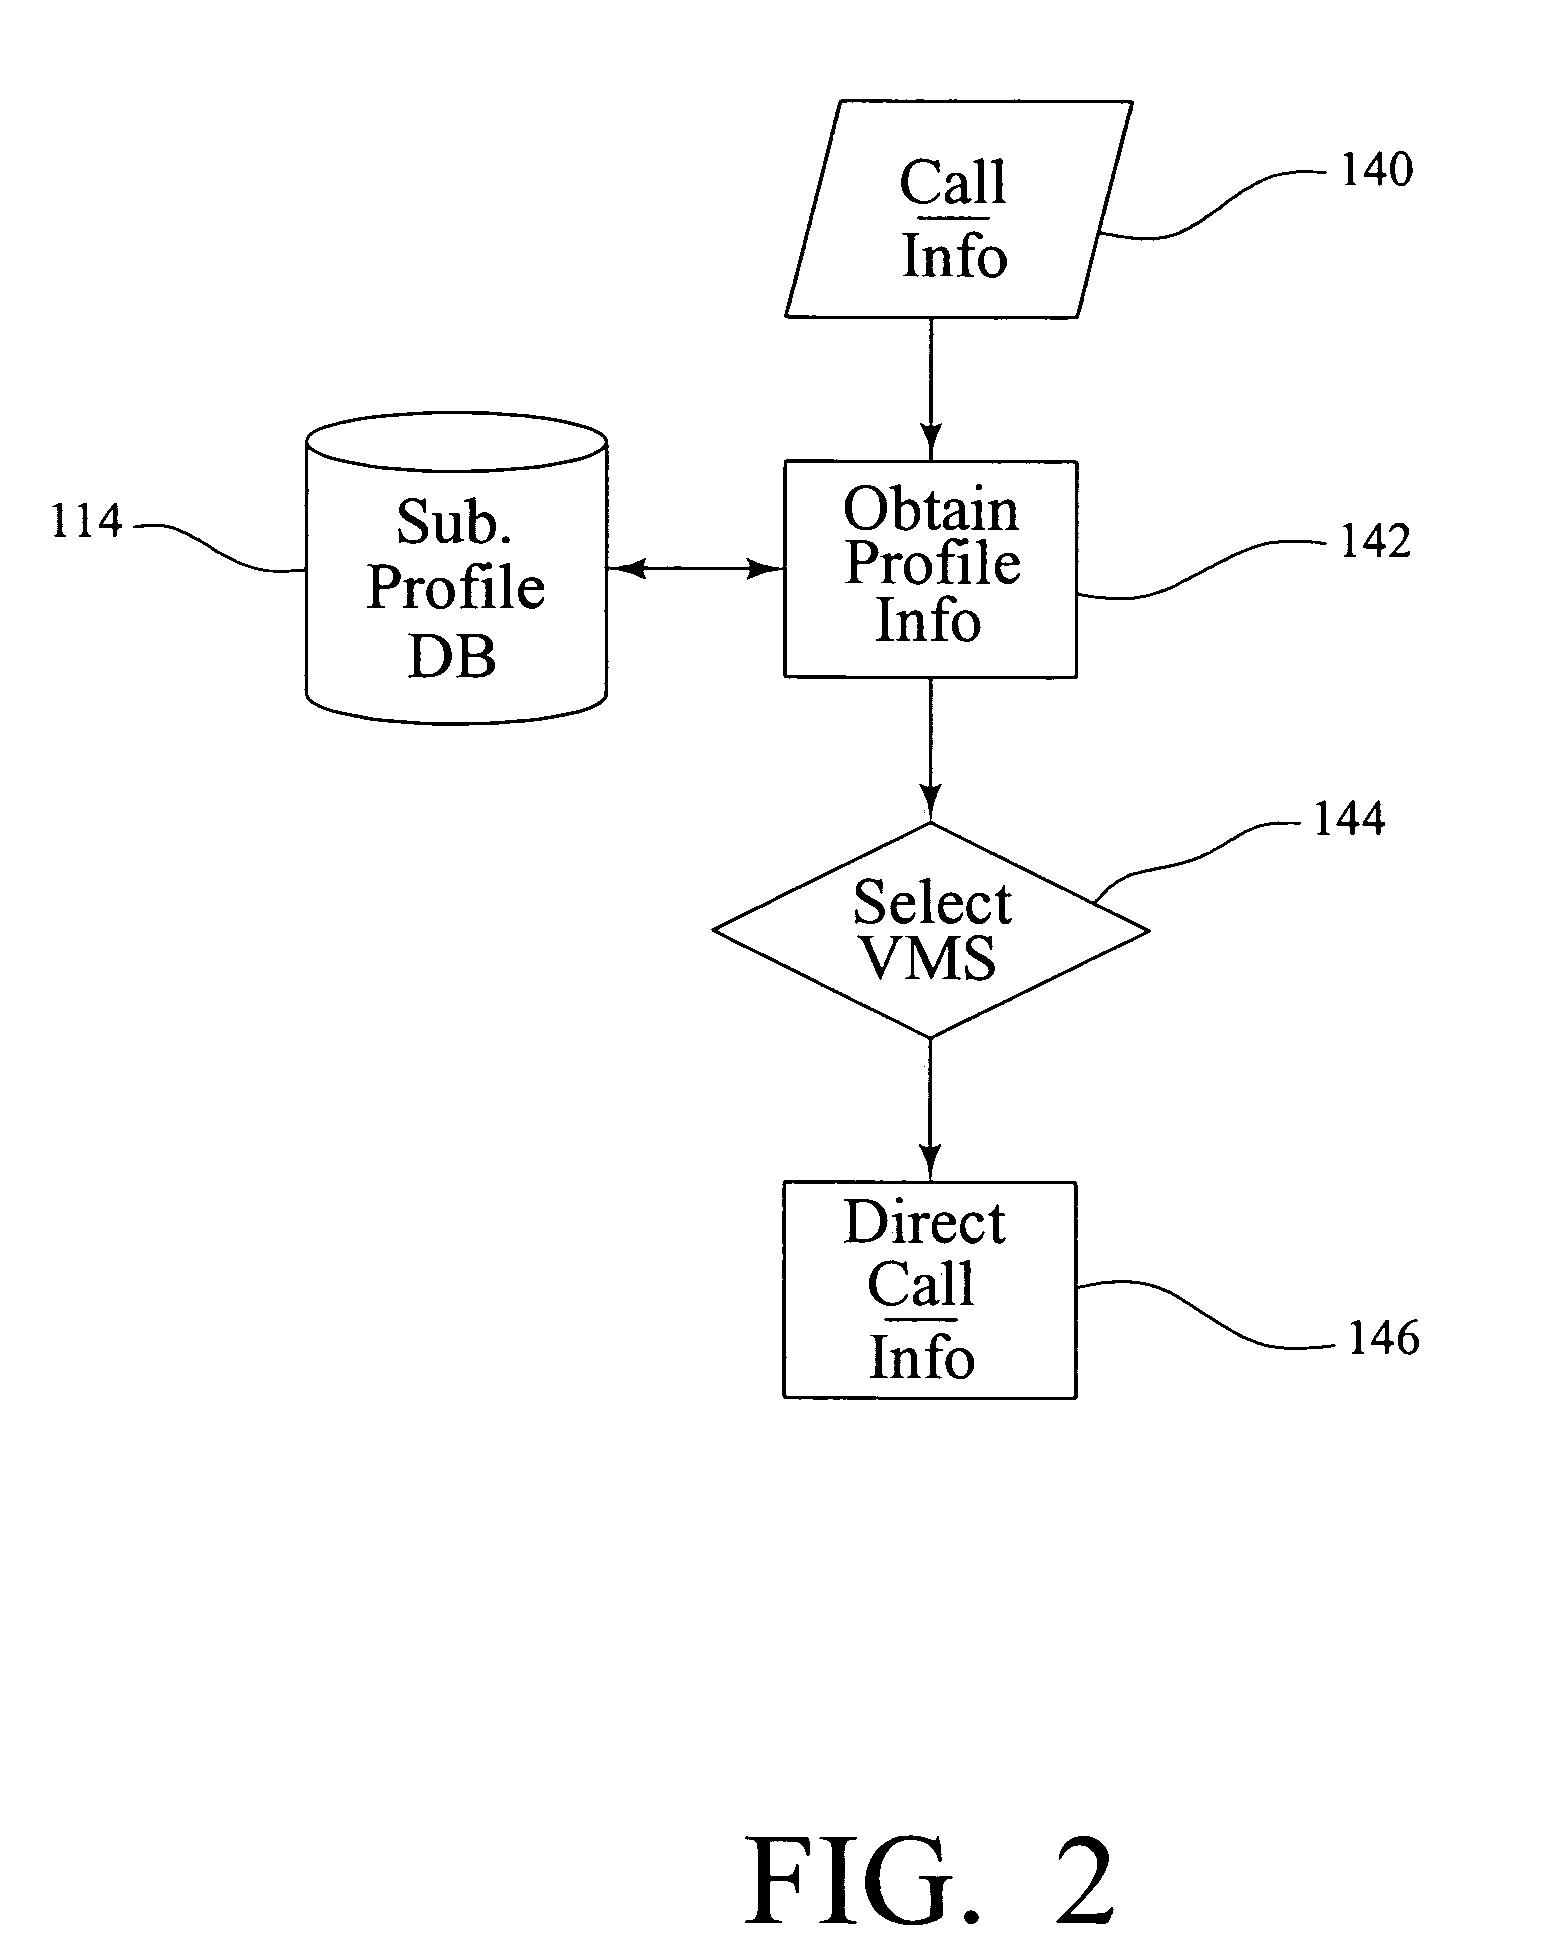 System and method for voice mail service in an environment having multiple voice mail technology platforms